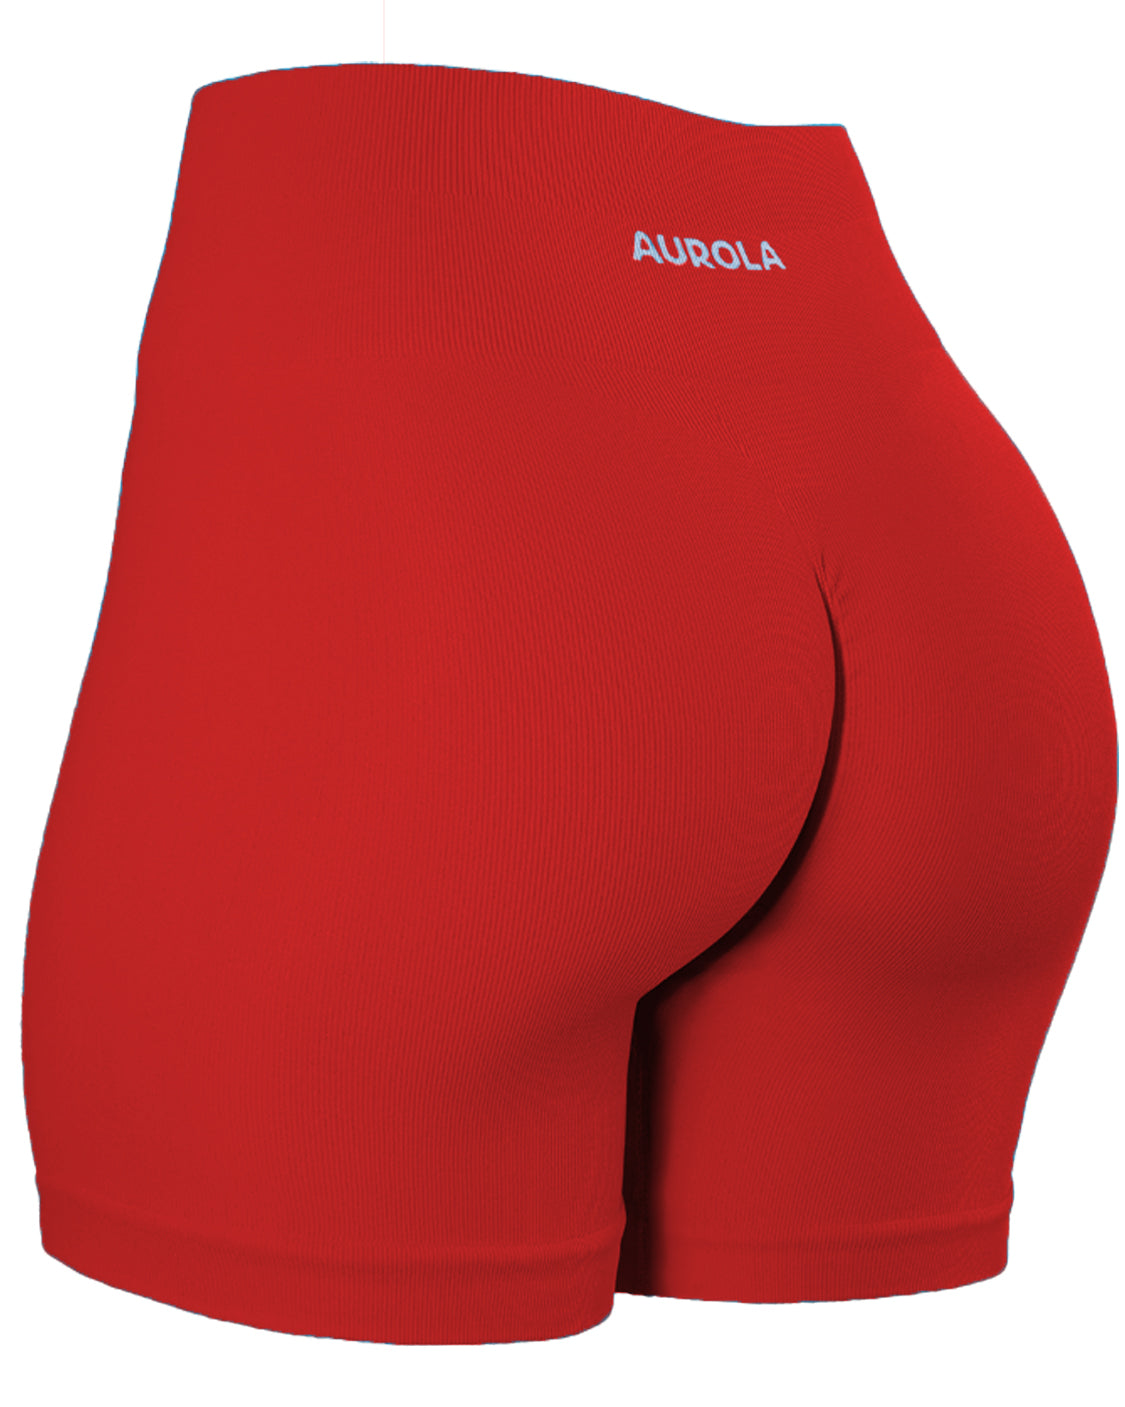 AUROLA Family on Instagram: The pictures above are of the new models that  have recently been released on aurolaus.com and  US. In Europe there  are only intensify 4.5 shorts and intensify